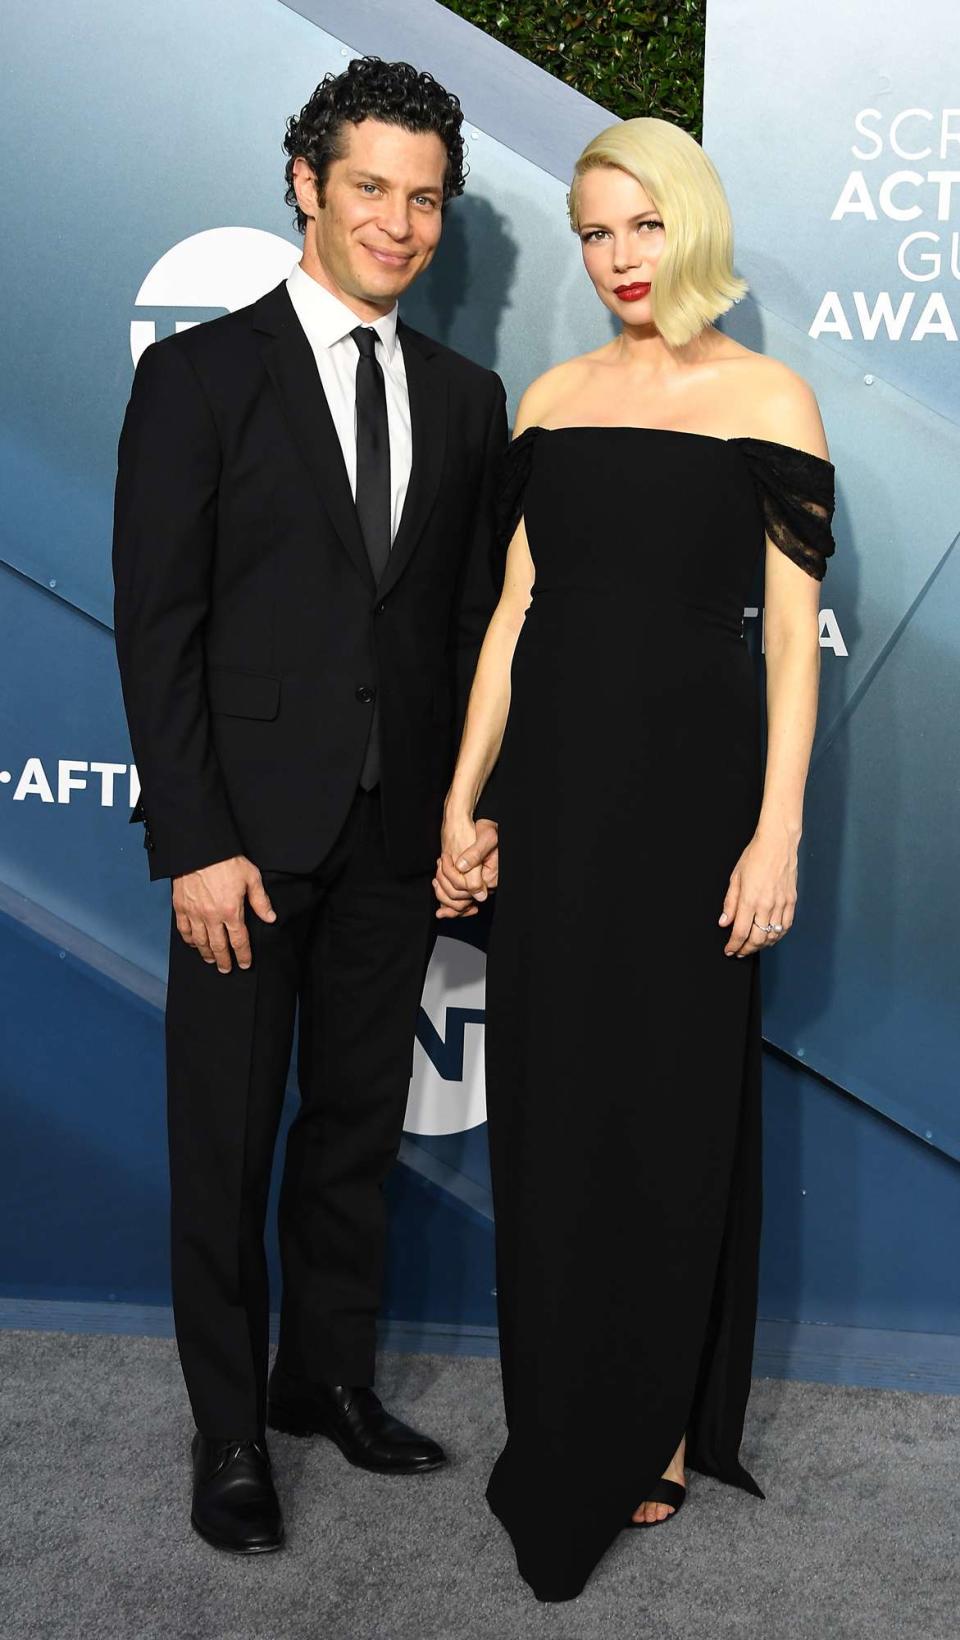 Thomas Kail and Michelle Williams attend the 26th Annual Screen Actors Guild Awards at The Shrine Auditorium on January 19, 2020 in Los Angeles, California